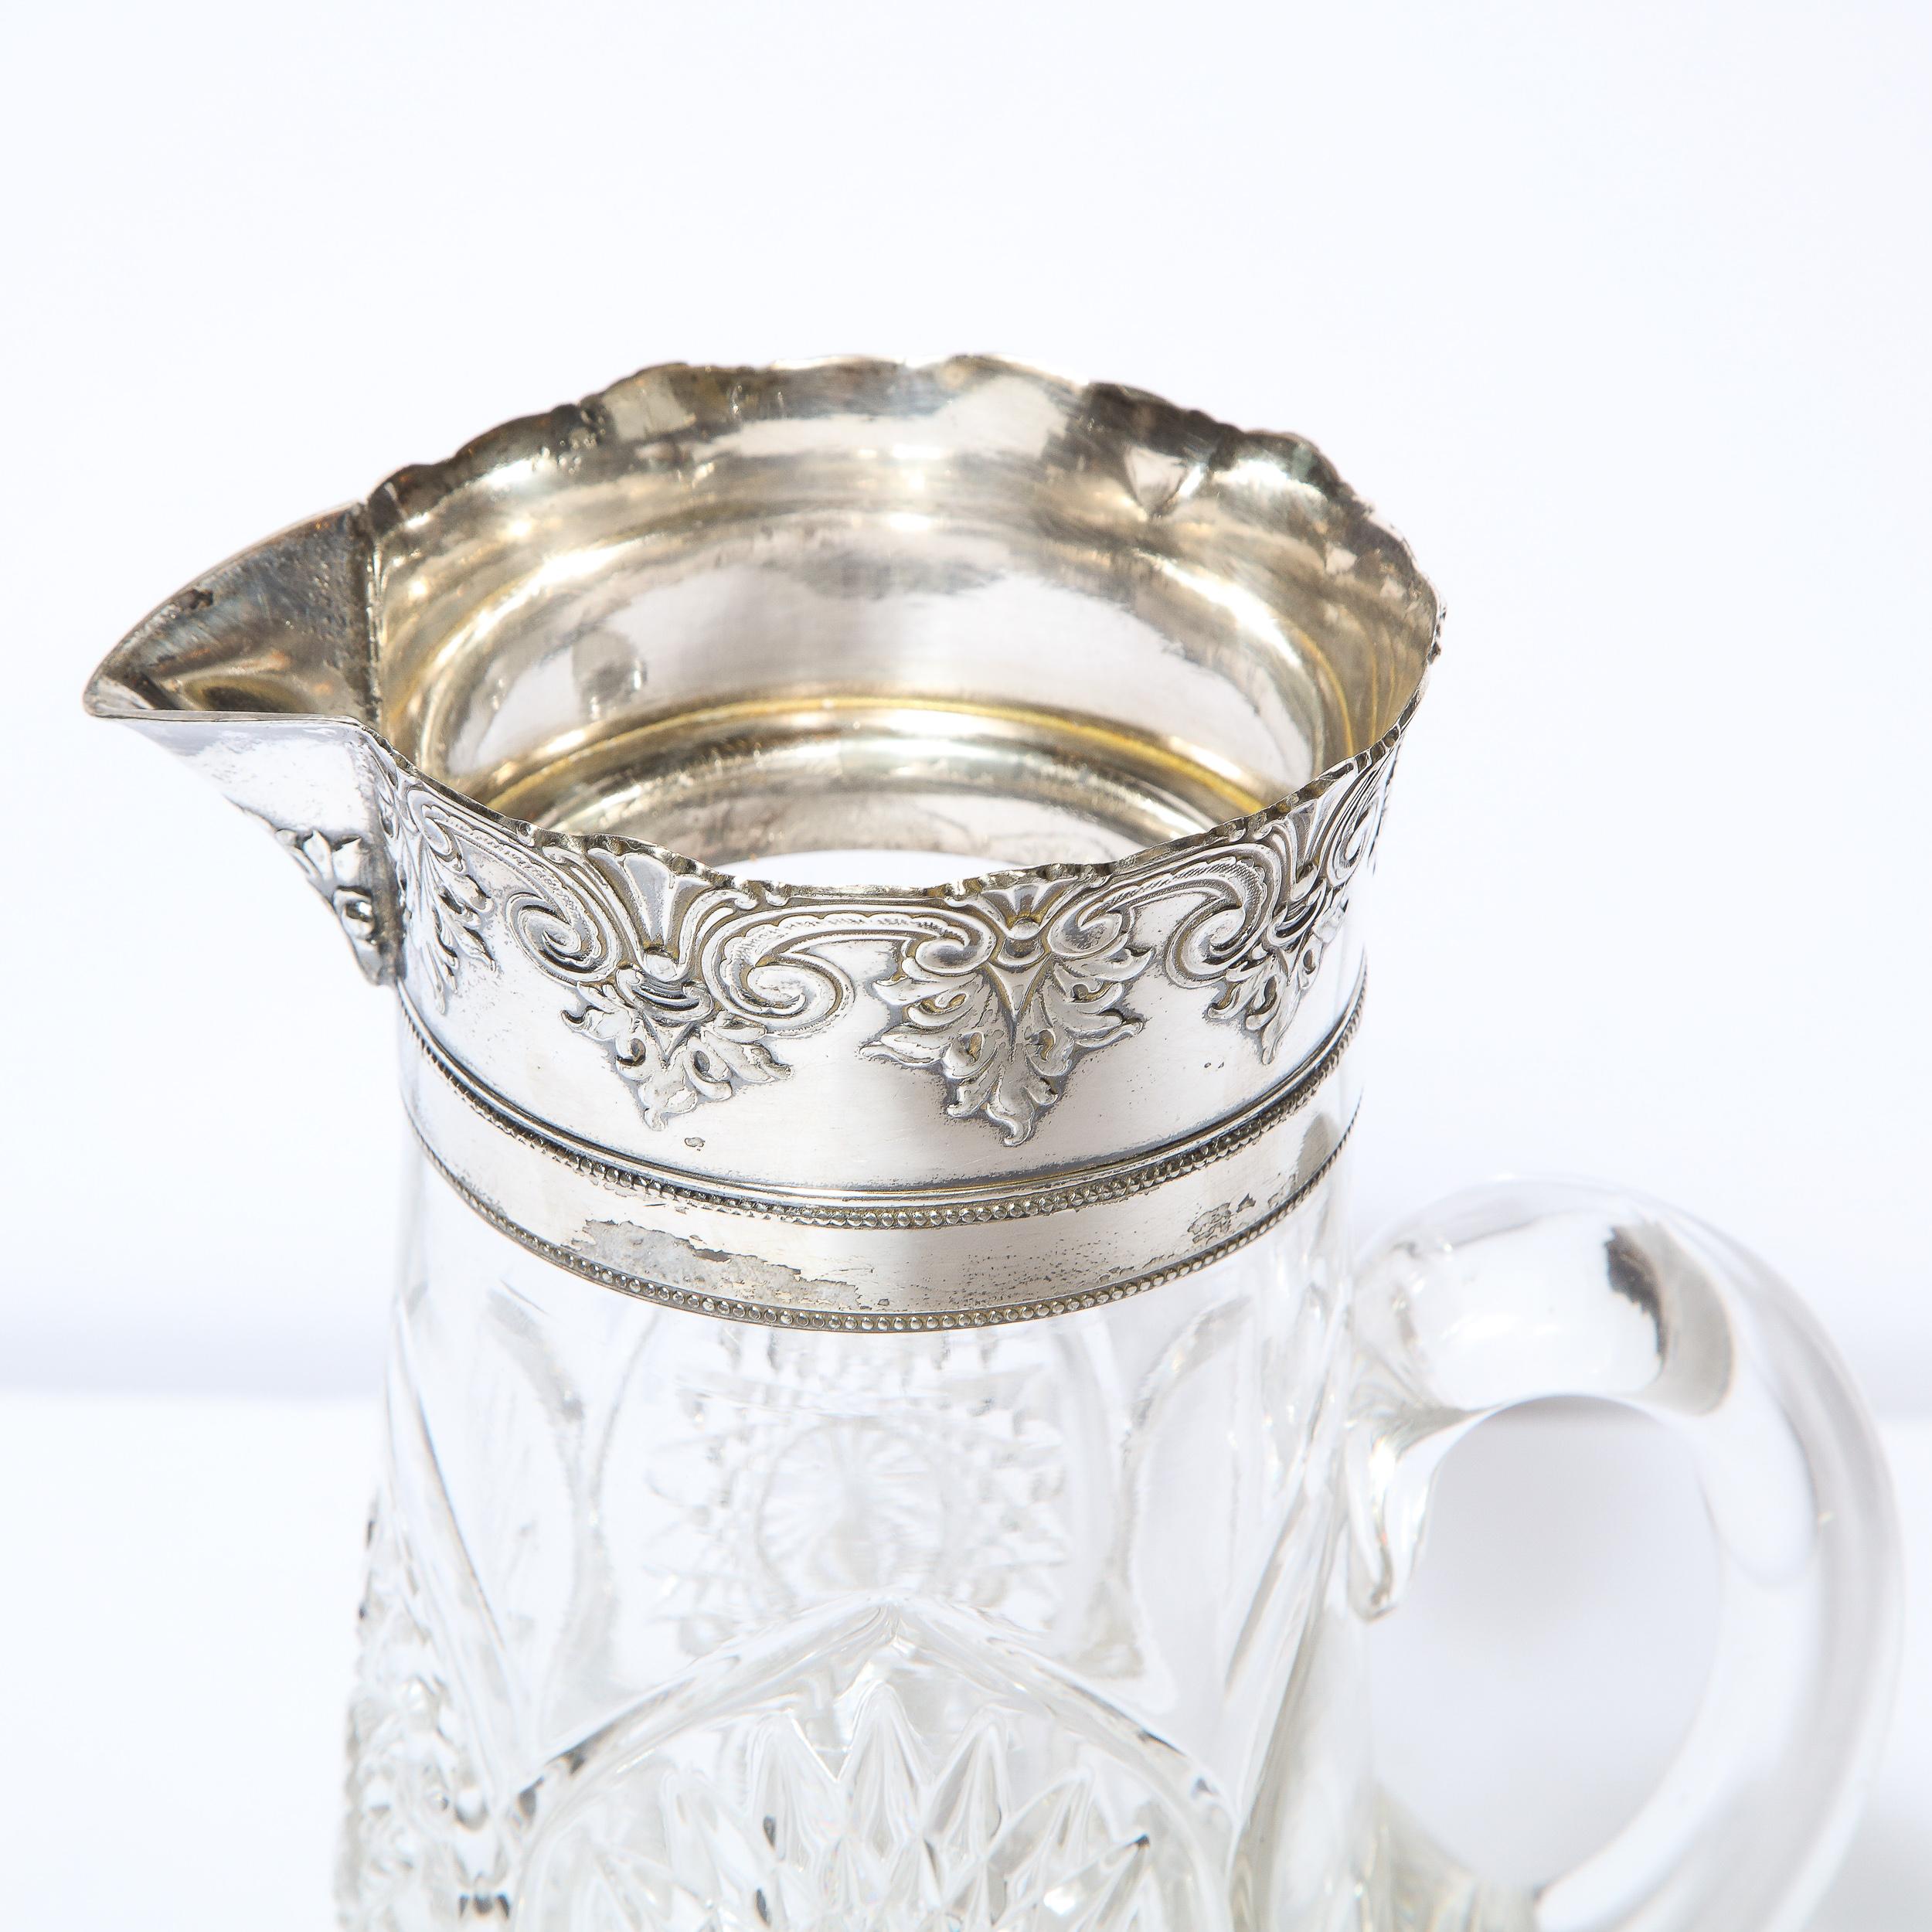 1940s Art Deco Pressed Glass Pitcher with Geometric Details & Silver Plated Top 7